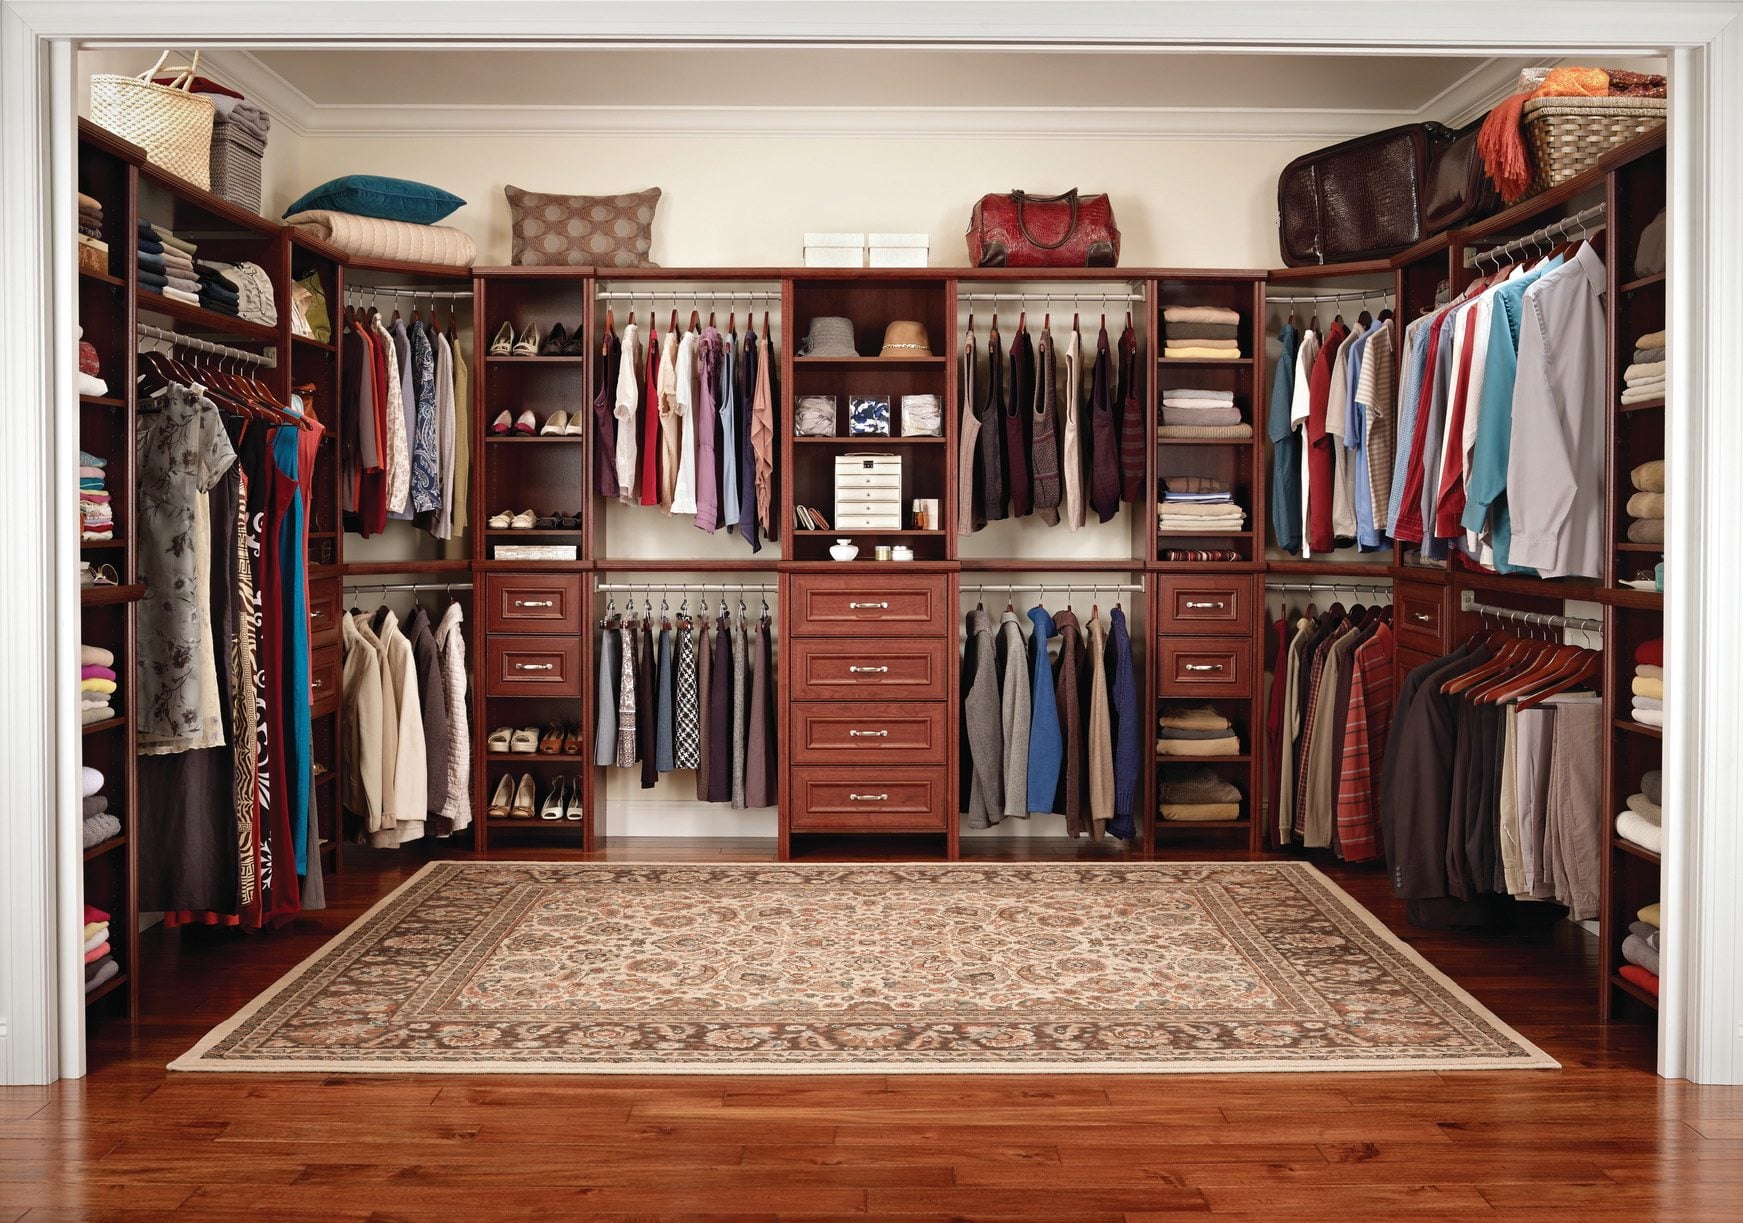 Spare room may be your future walk-in closet - The Columbian